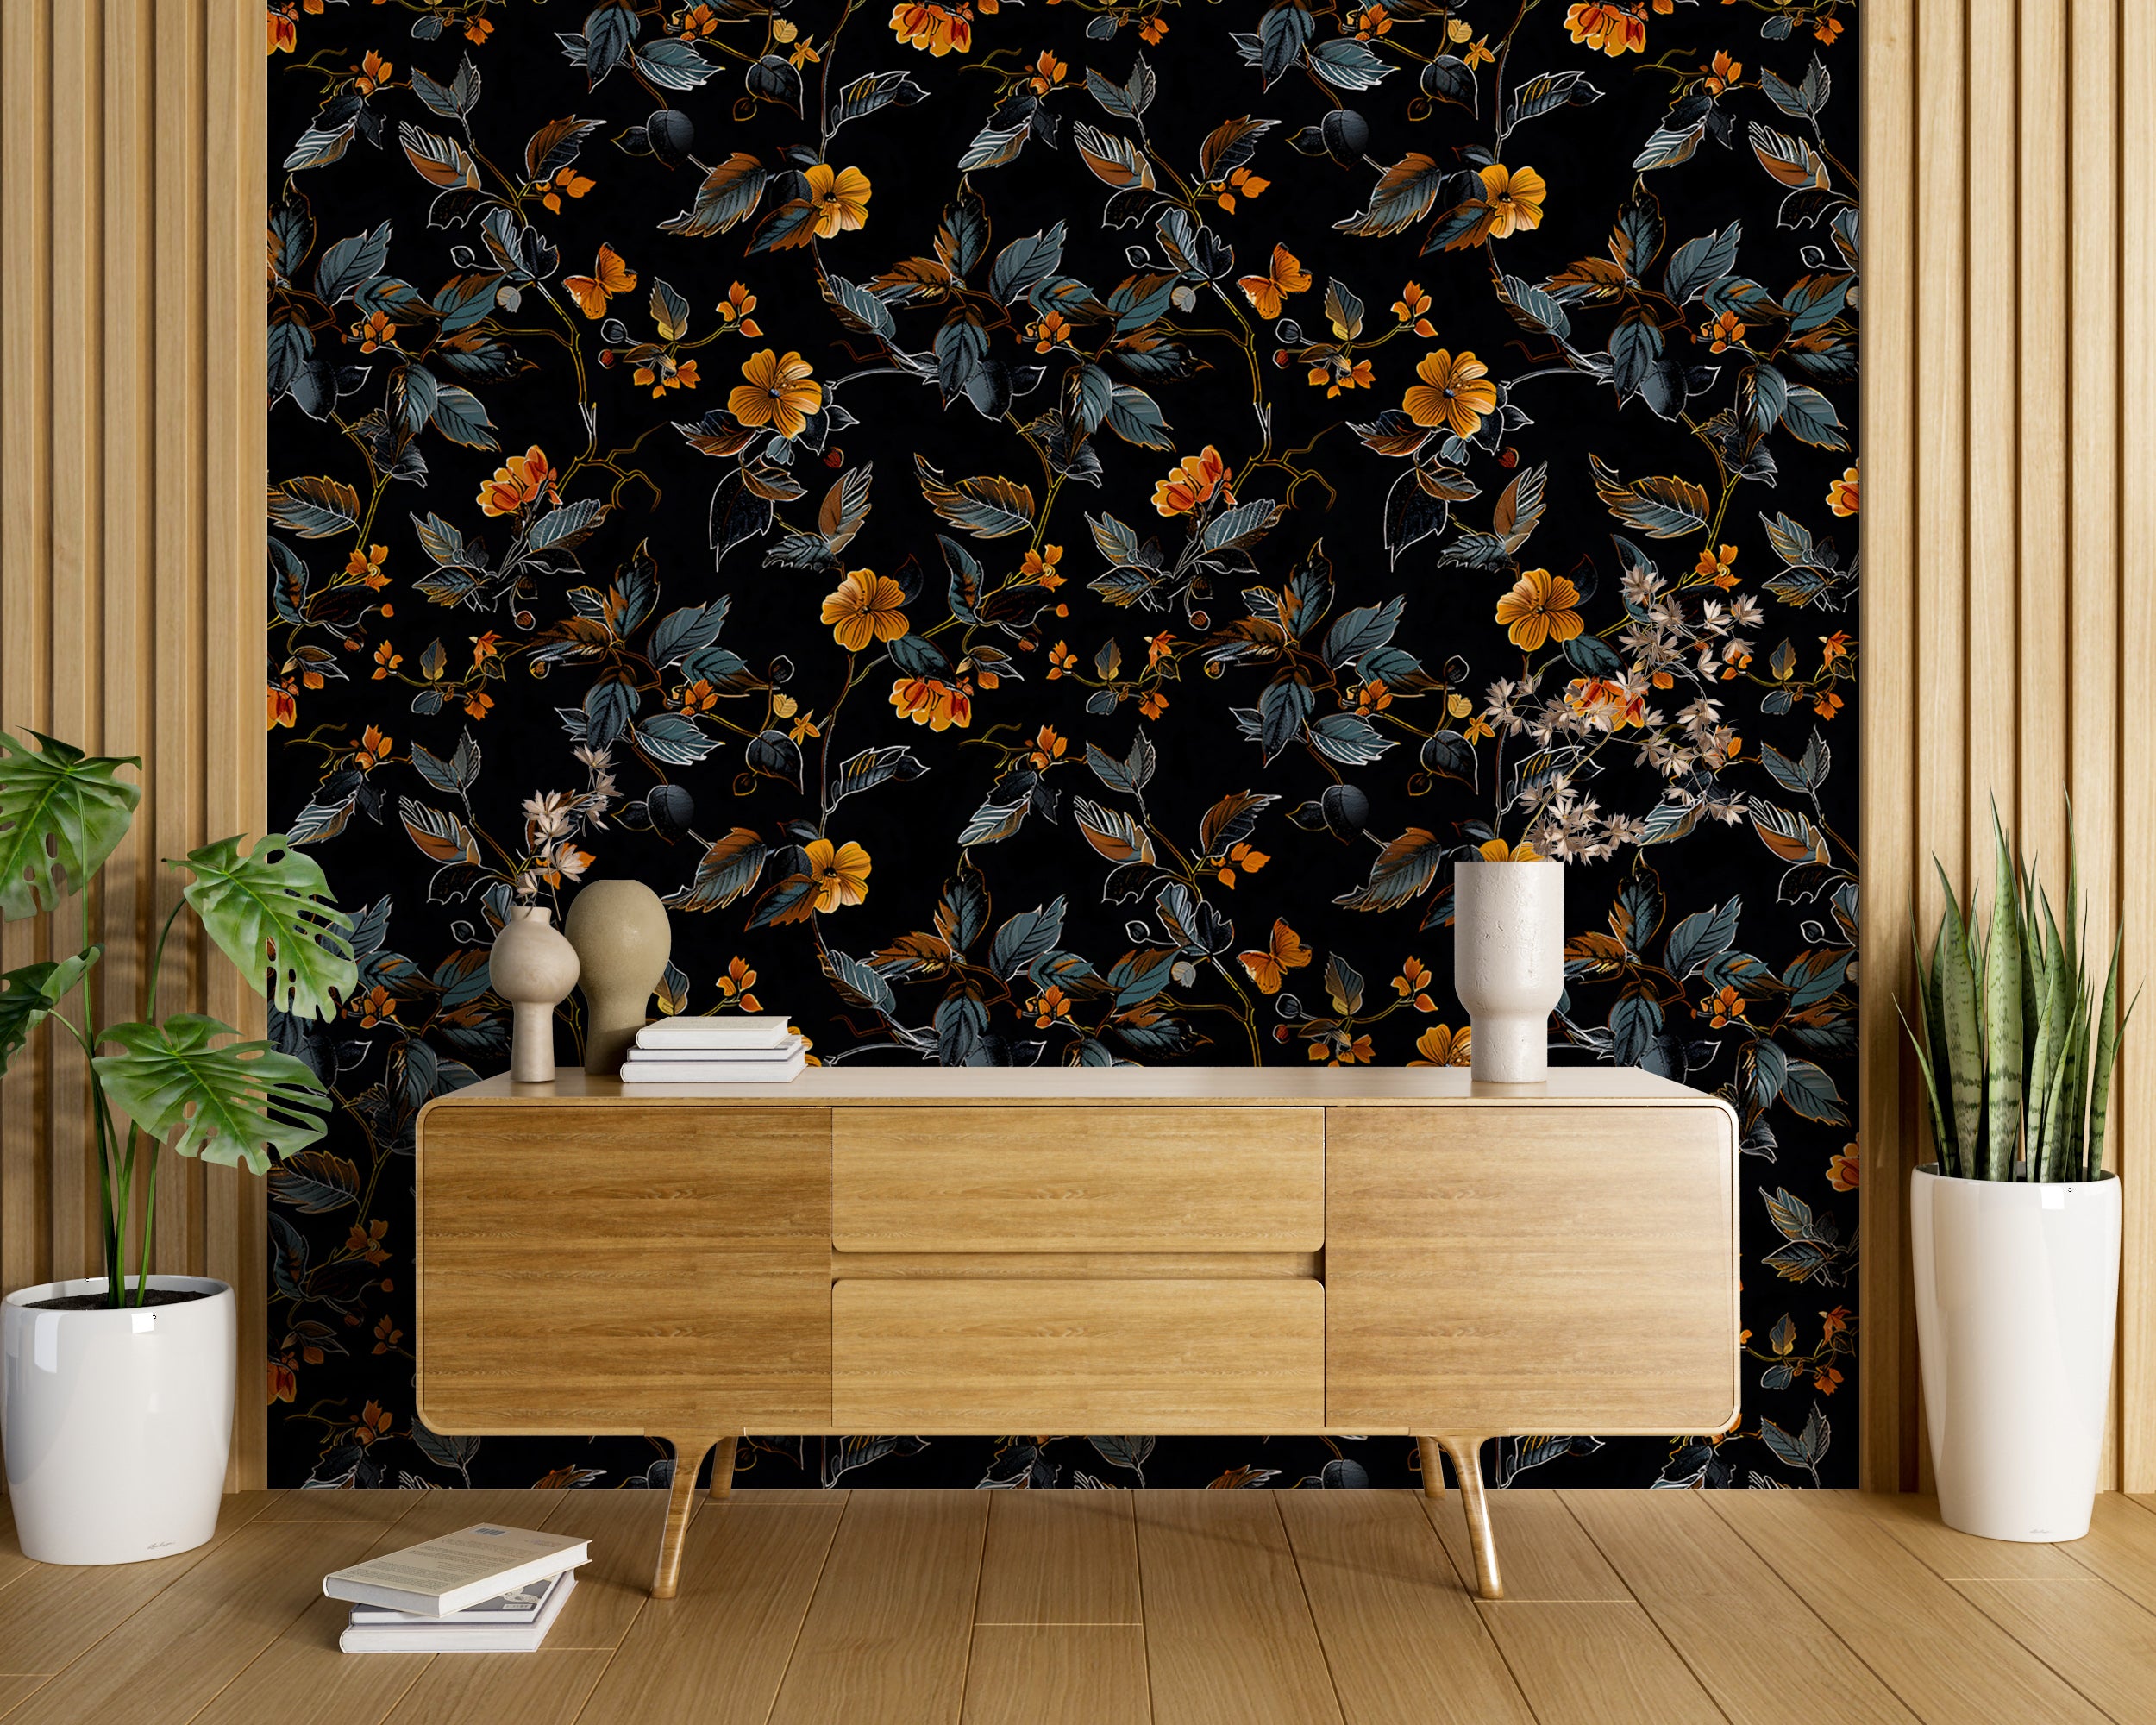 Abstract Dark Floral Wallpaper, Black and Orange Botanical Wallpaper, Peel and Stick Orange Flowers Wall Decal, Removable Floral Decor